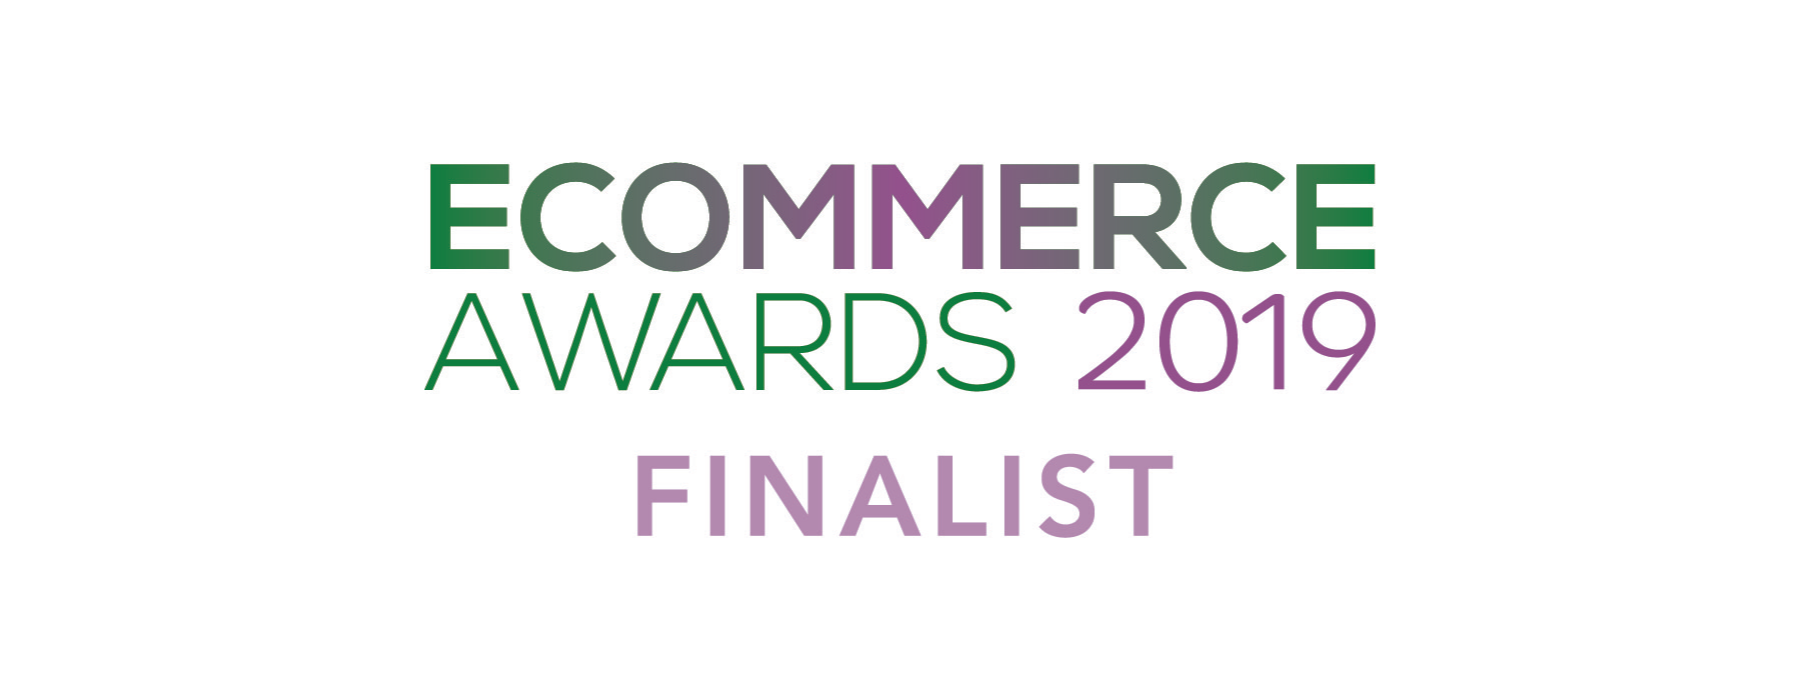 Rapiscan Systems secures 2 finalist positions in the eCommerce Awards 2019!